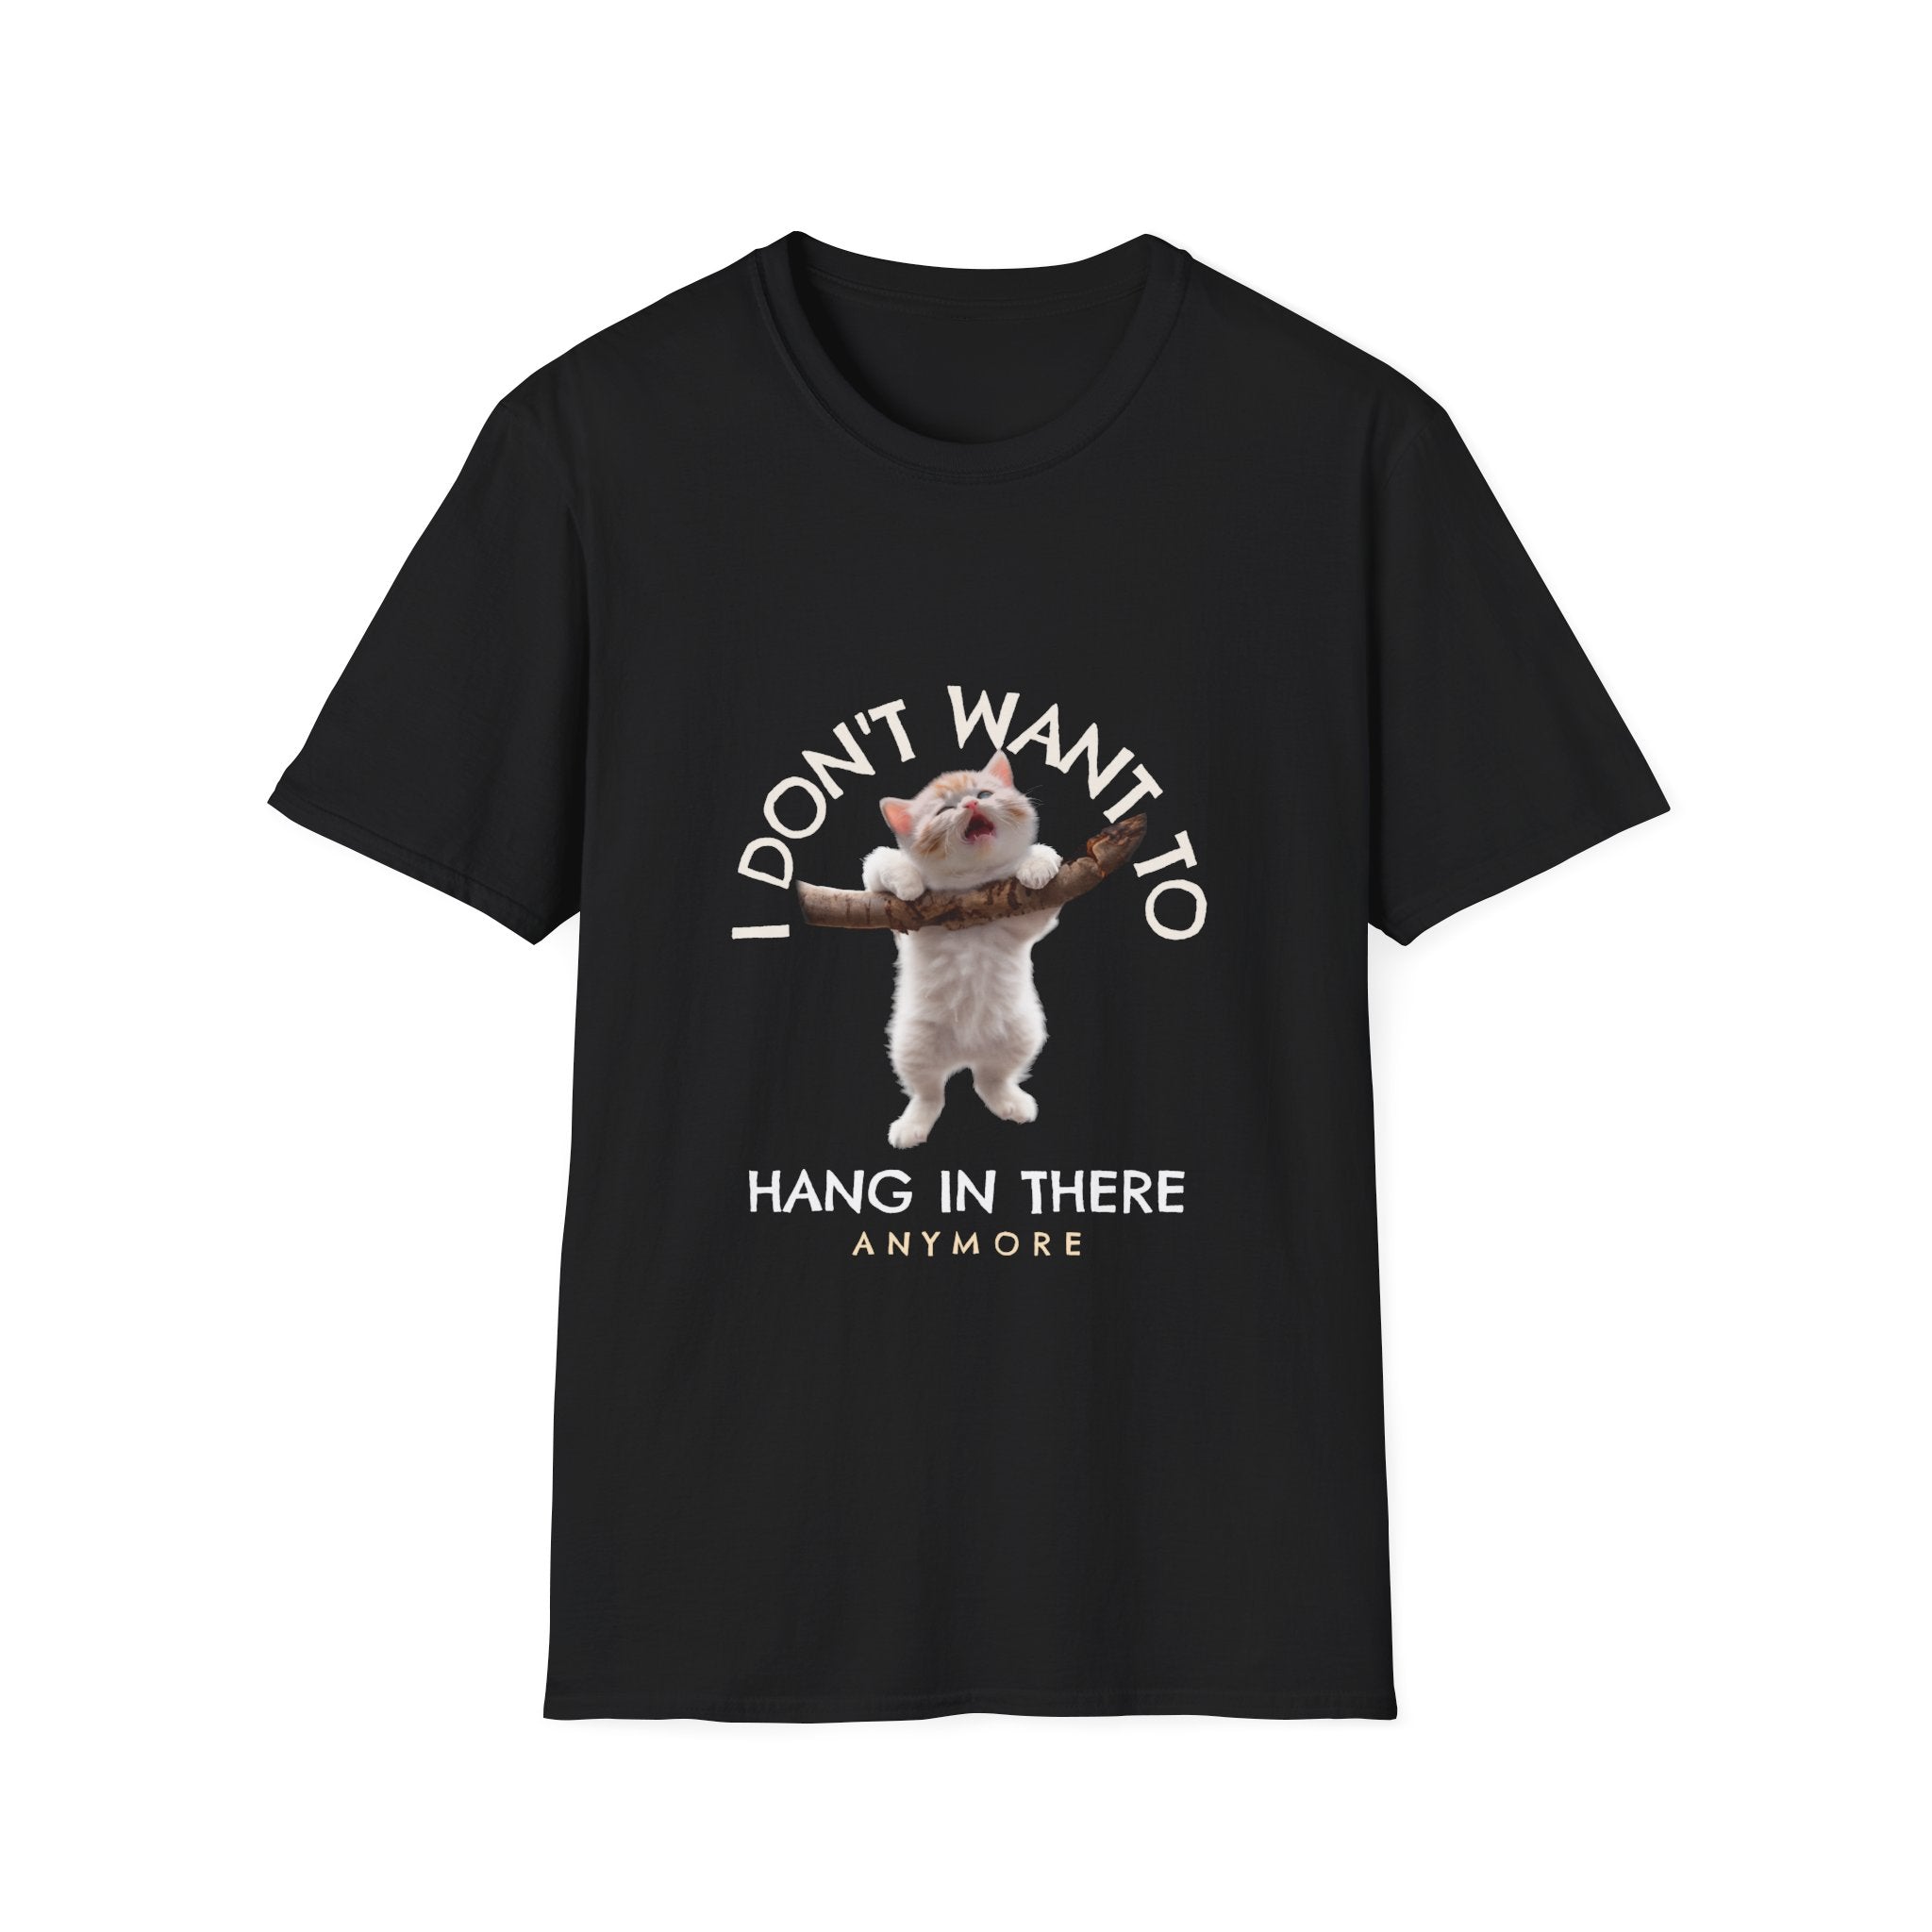 I Don't Want to Hang in There Anymore T-Shirt